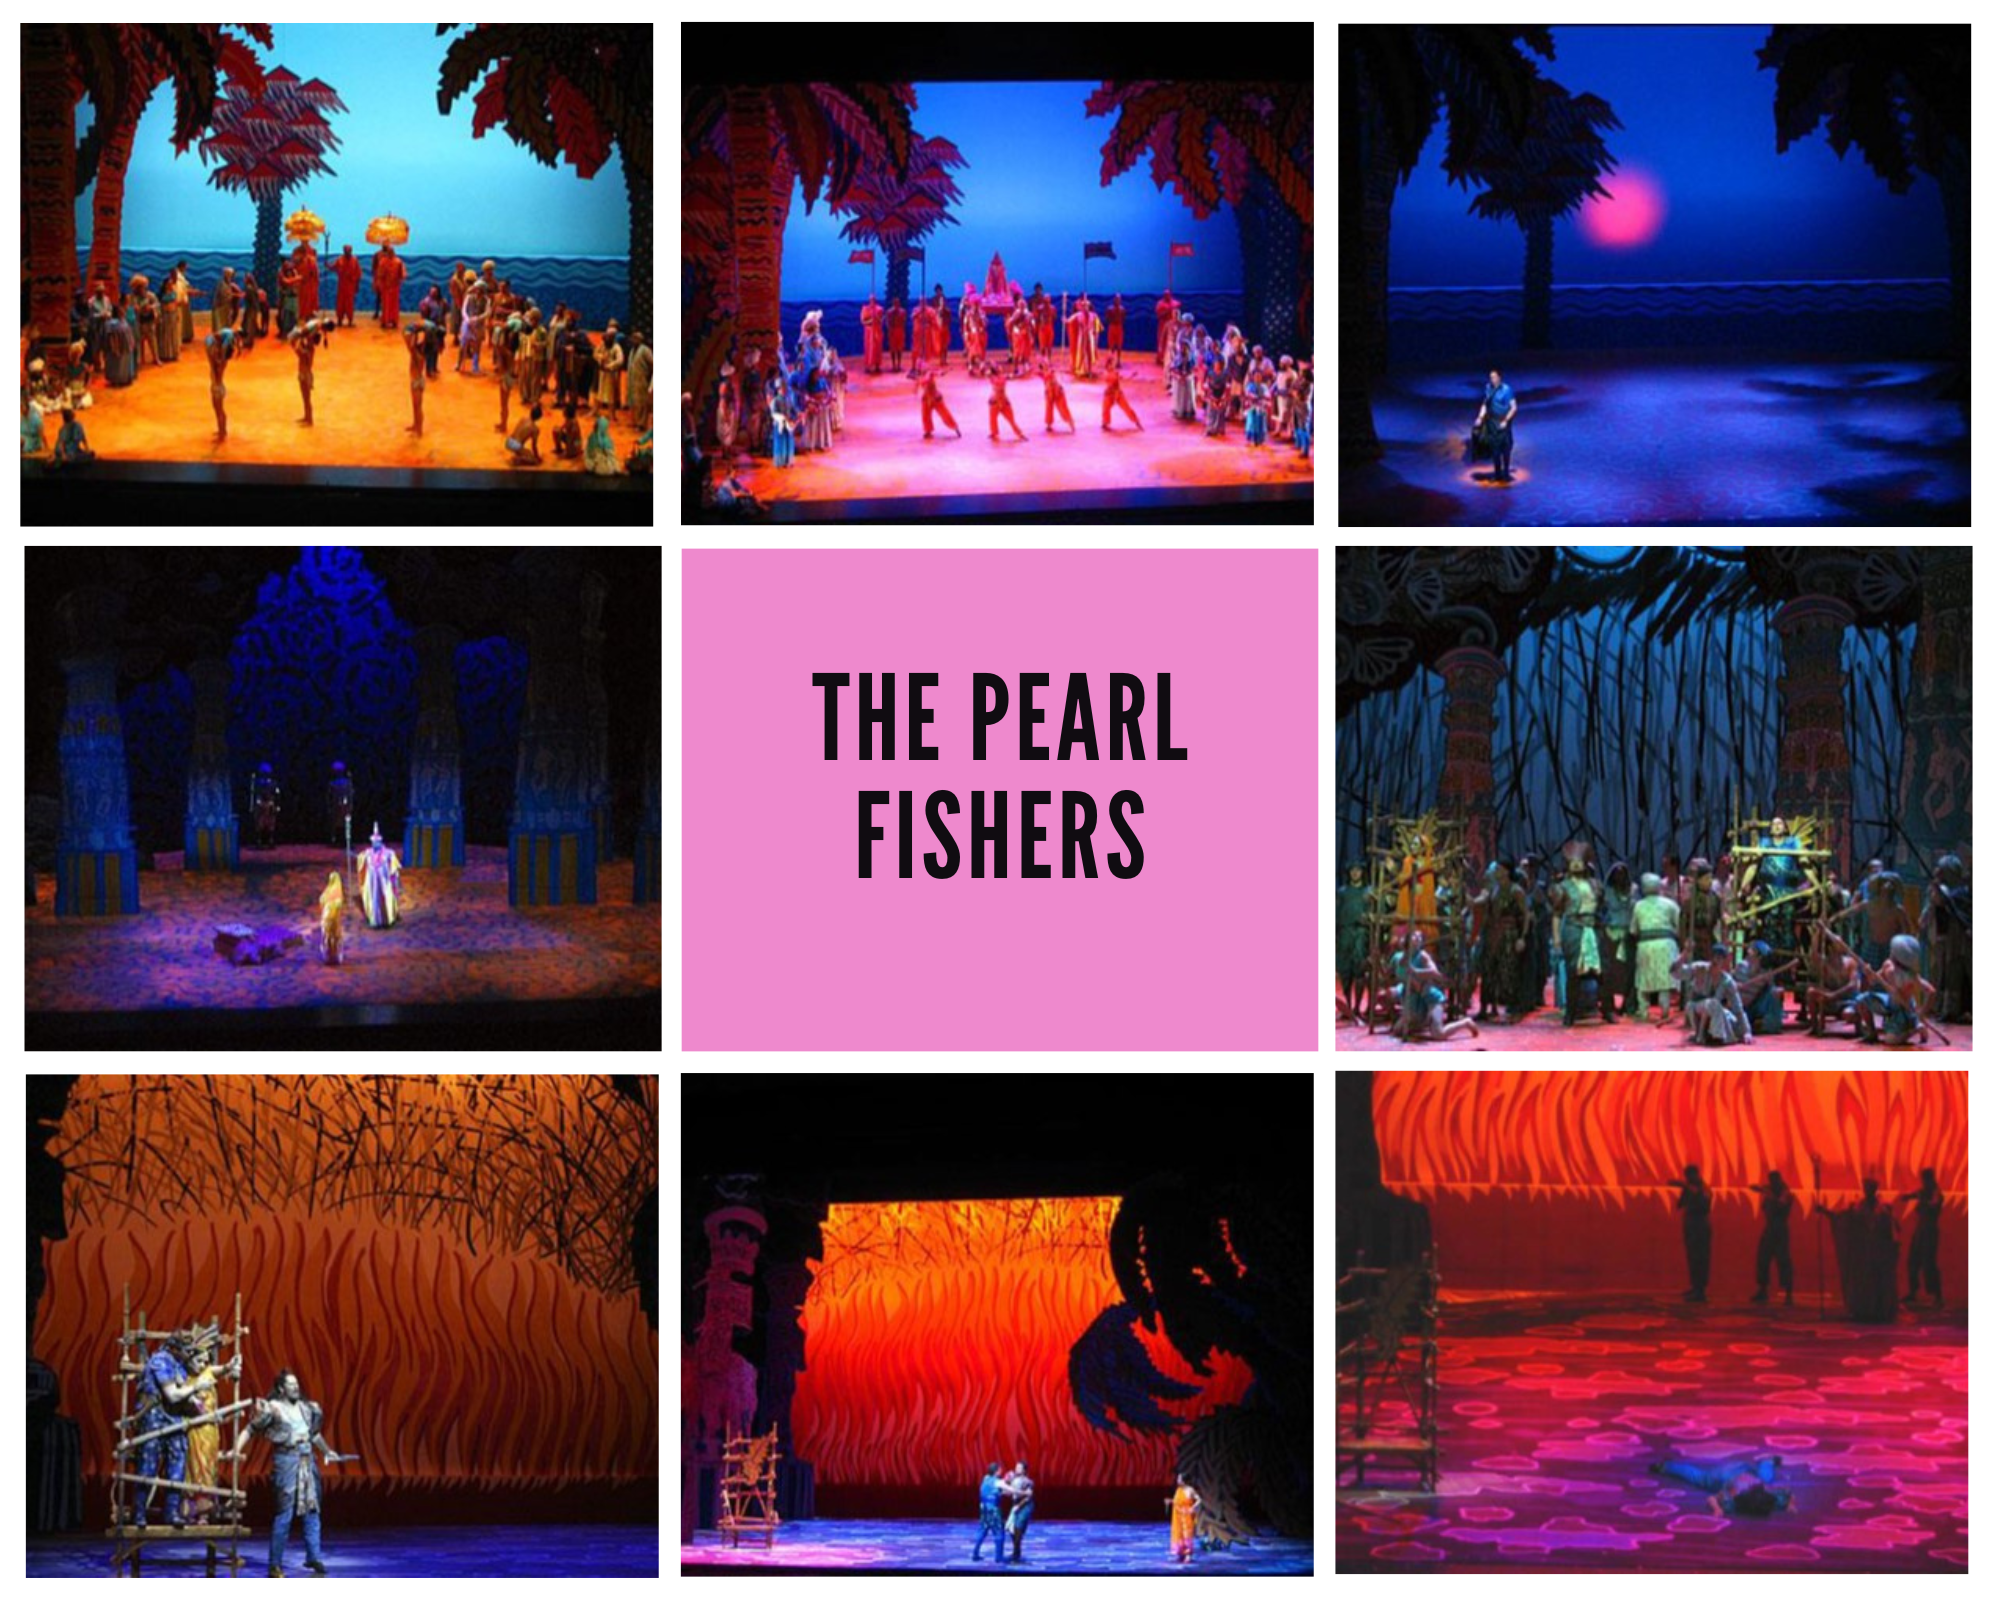 The pearl fishers